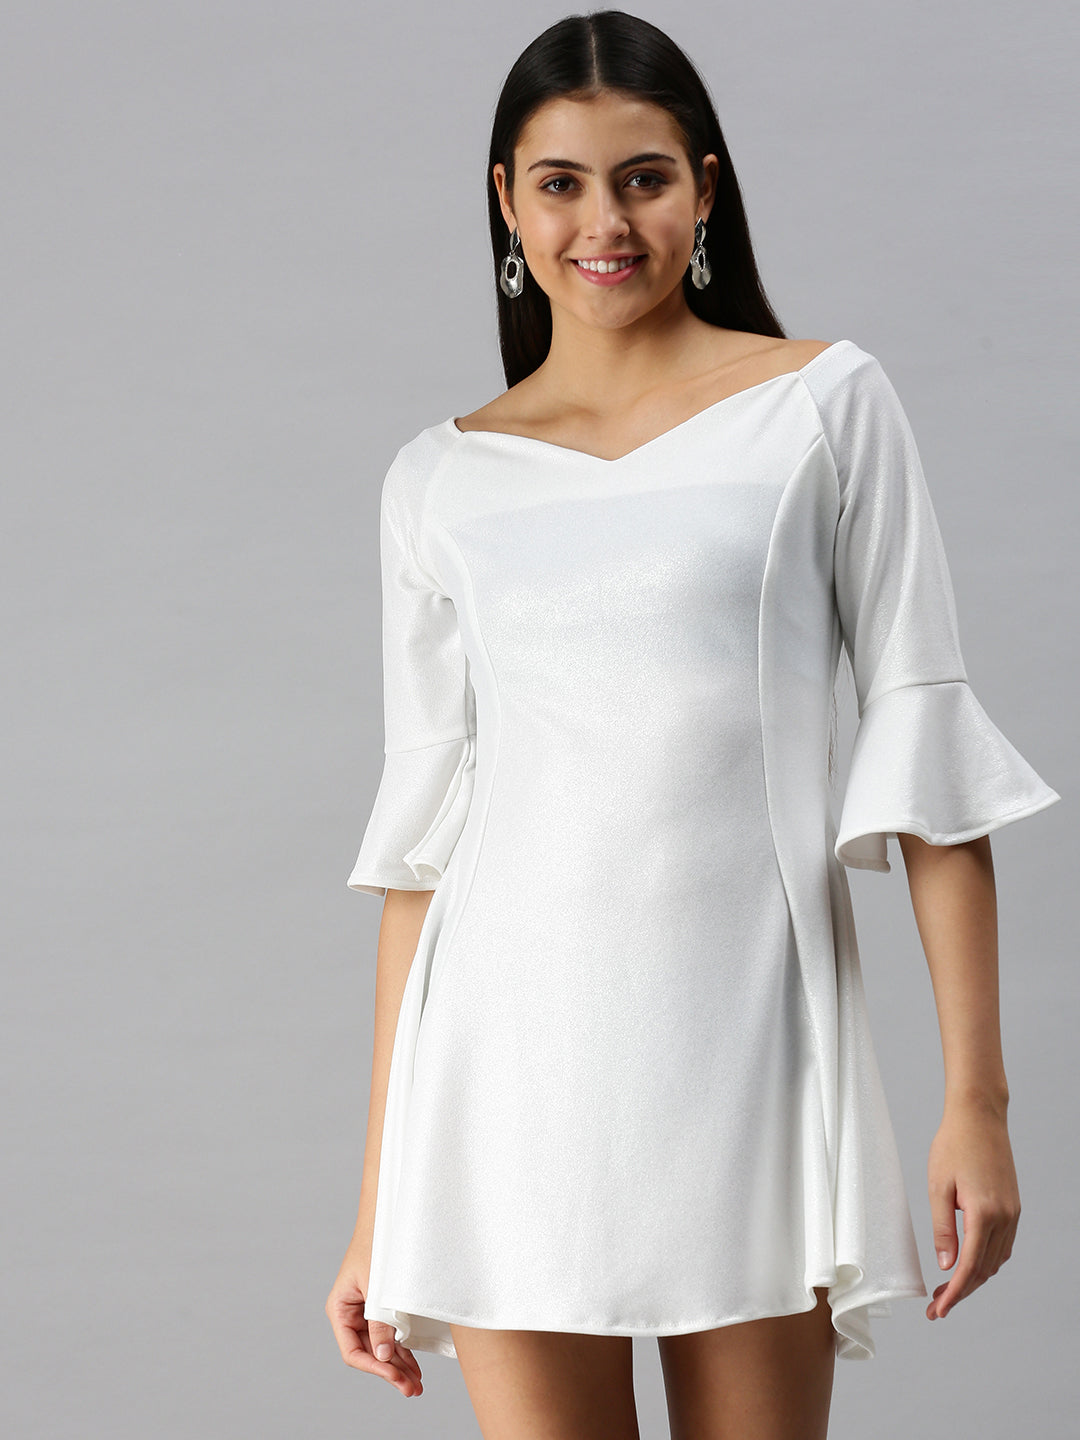 Women's Fit and Flare White Solid Dress